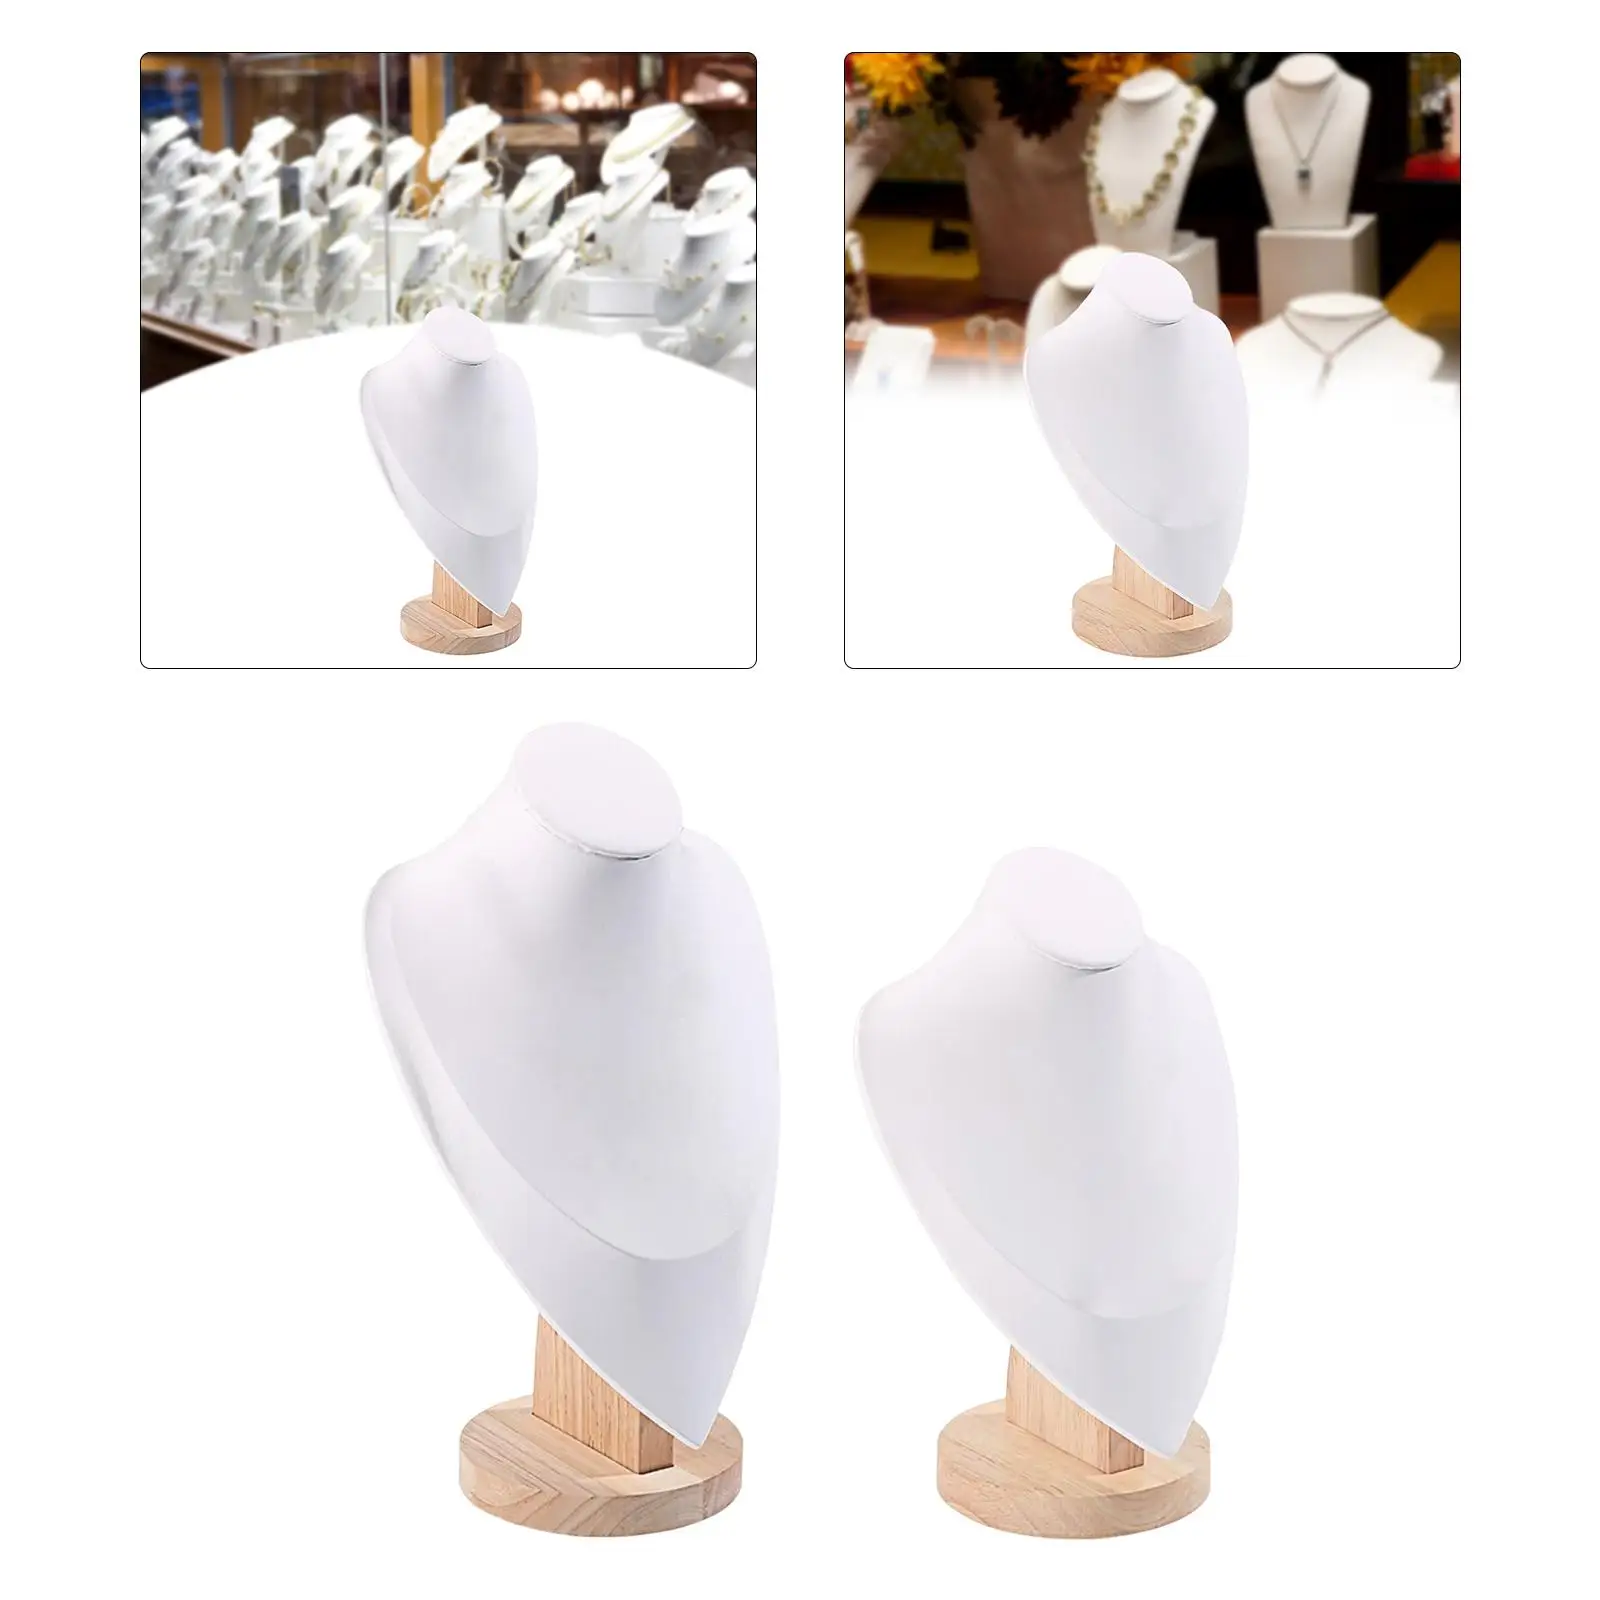 Mannequin Bust Display Stand with Base Wood Storage Hanger Organizer for Jewelry Show Photography Earring Showroom Business